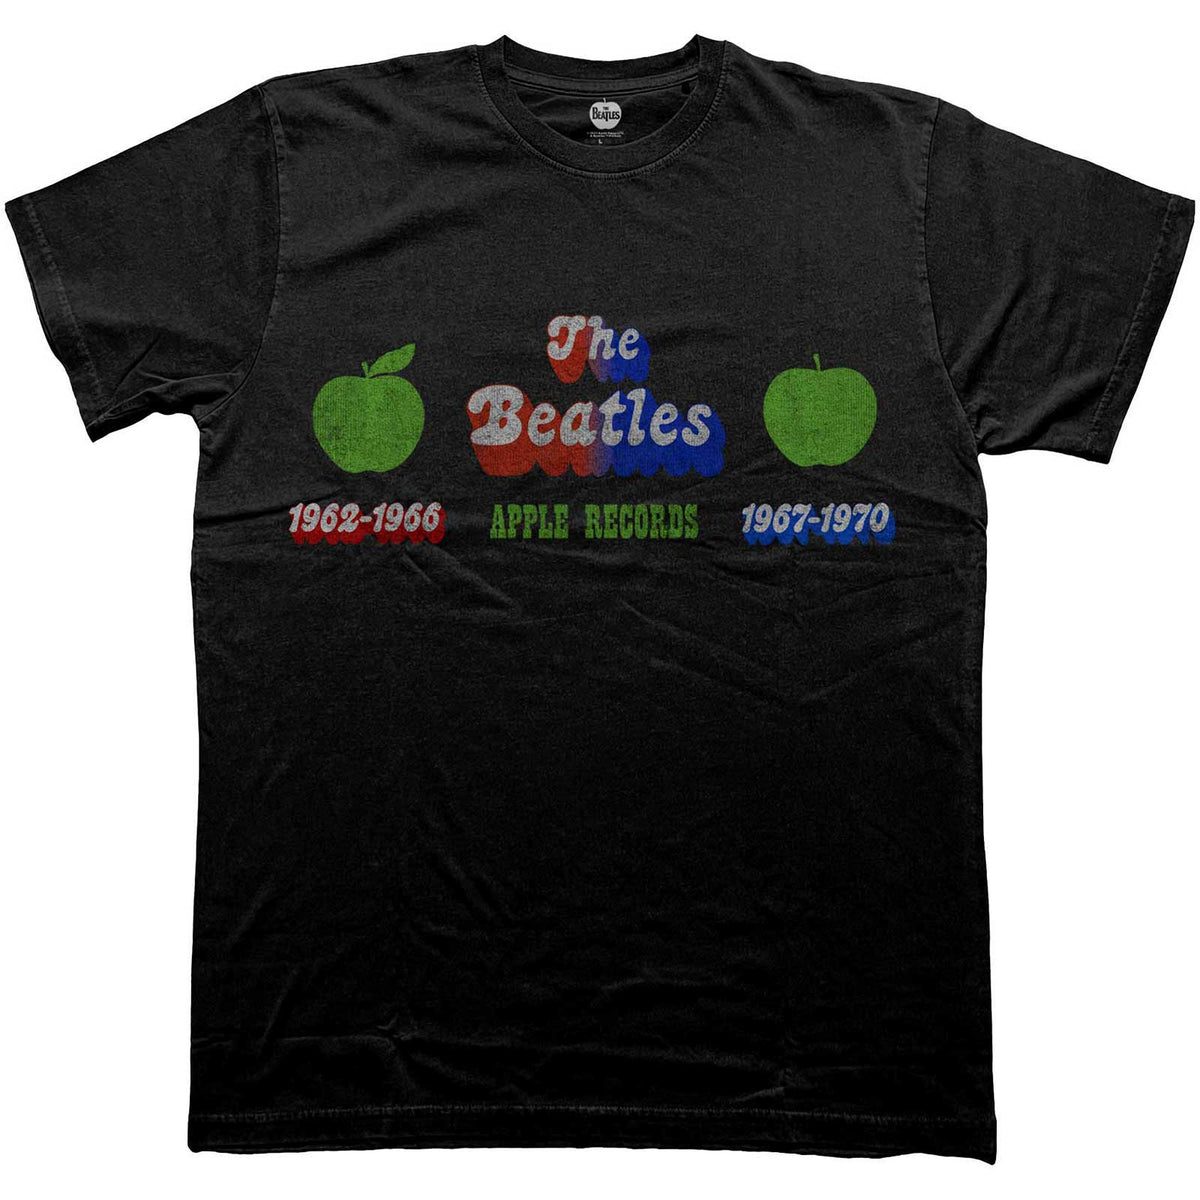 The Beatles T-Shirt - Apple Years - Unisex Official Licensed Design